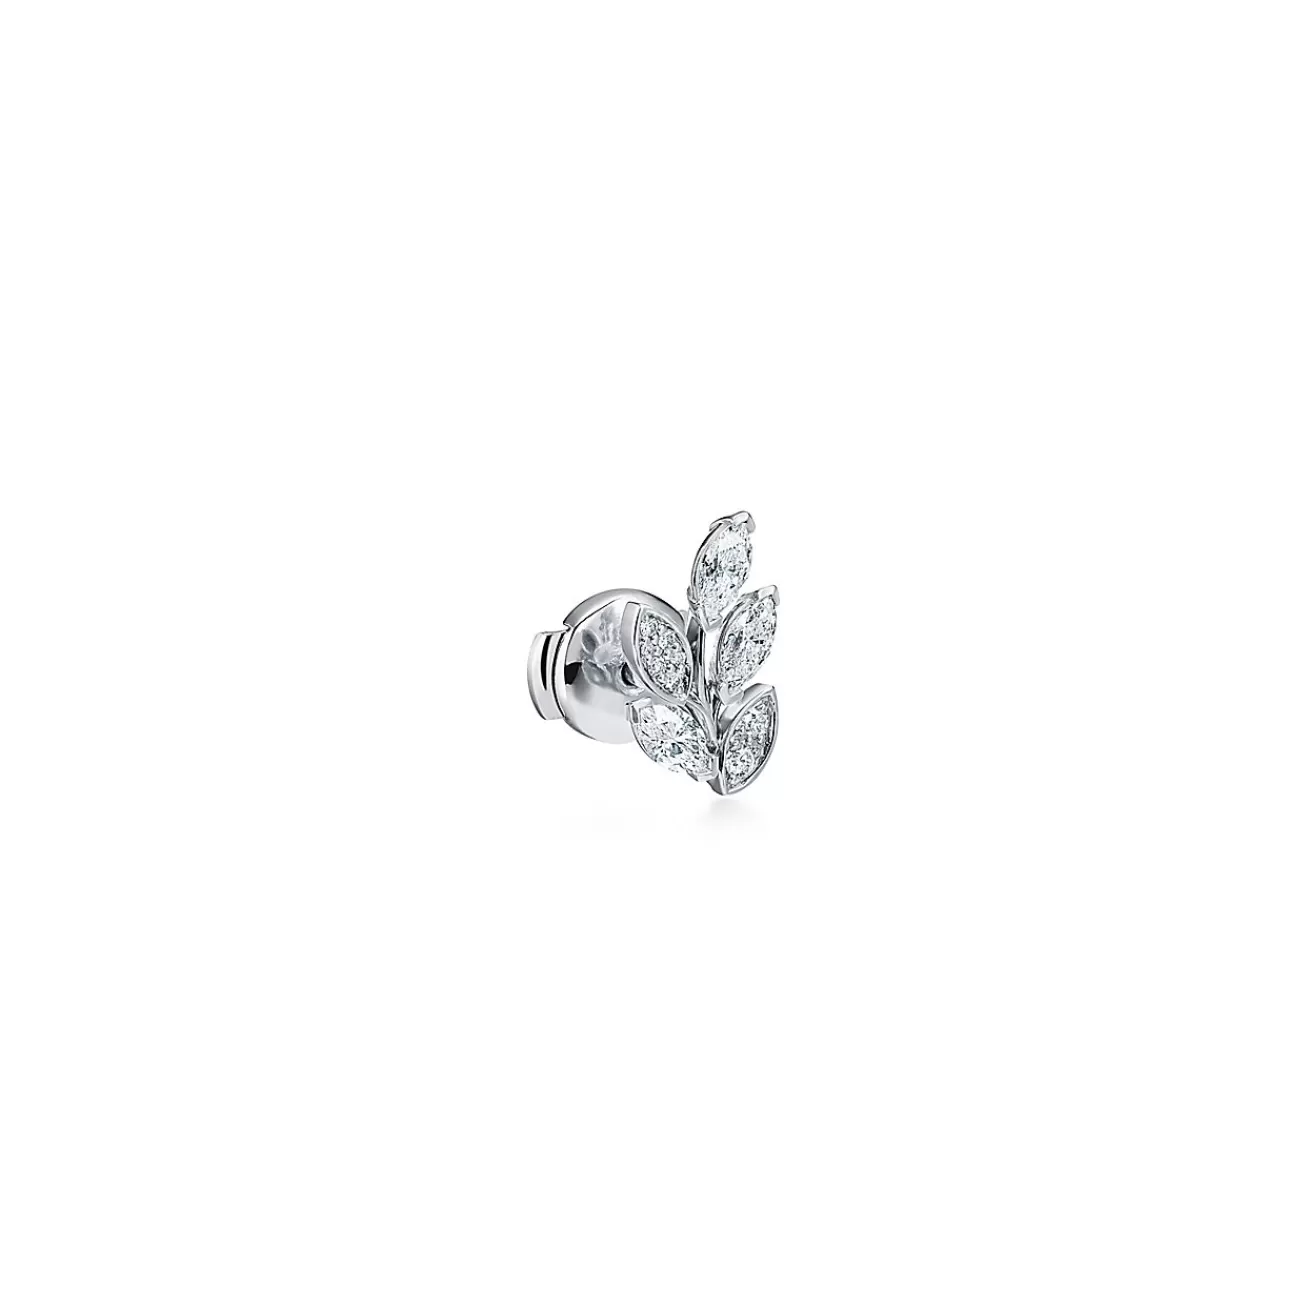 Tiffany & Co. Tiffany Victoria® diamond vine earrings in platinum, small. | ^ Earrings | Gifts for Her